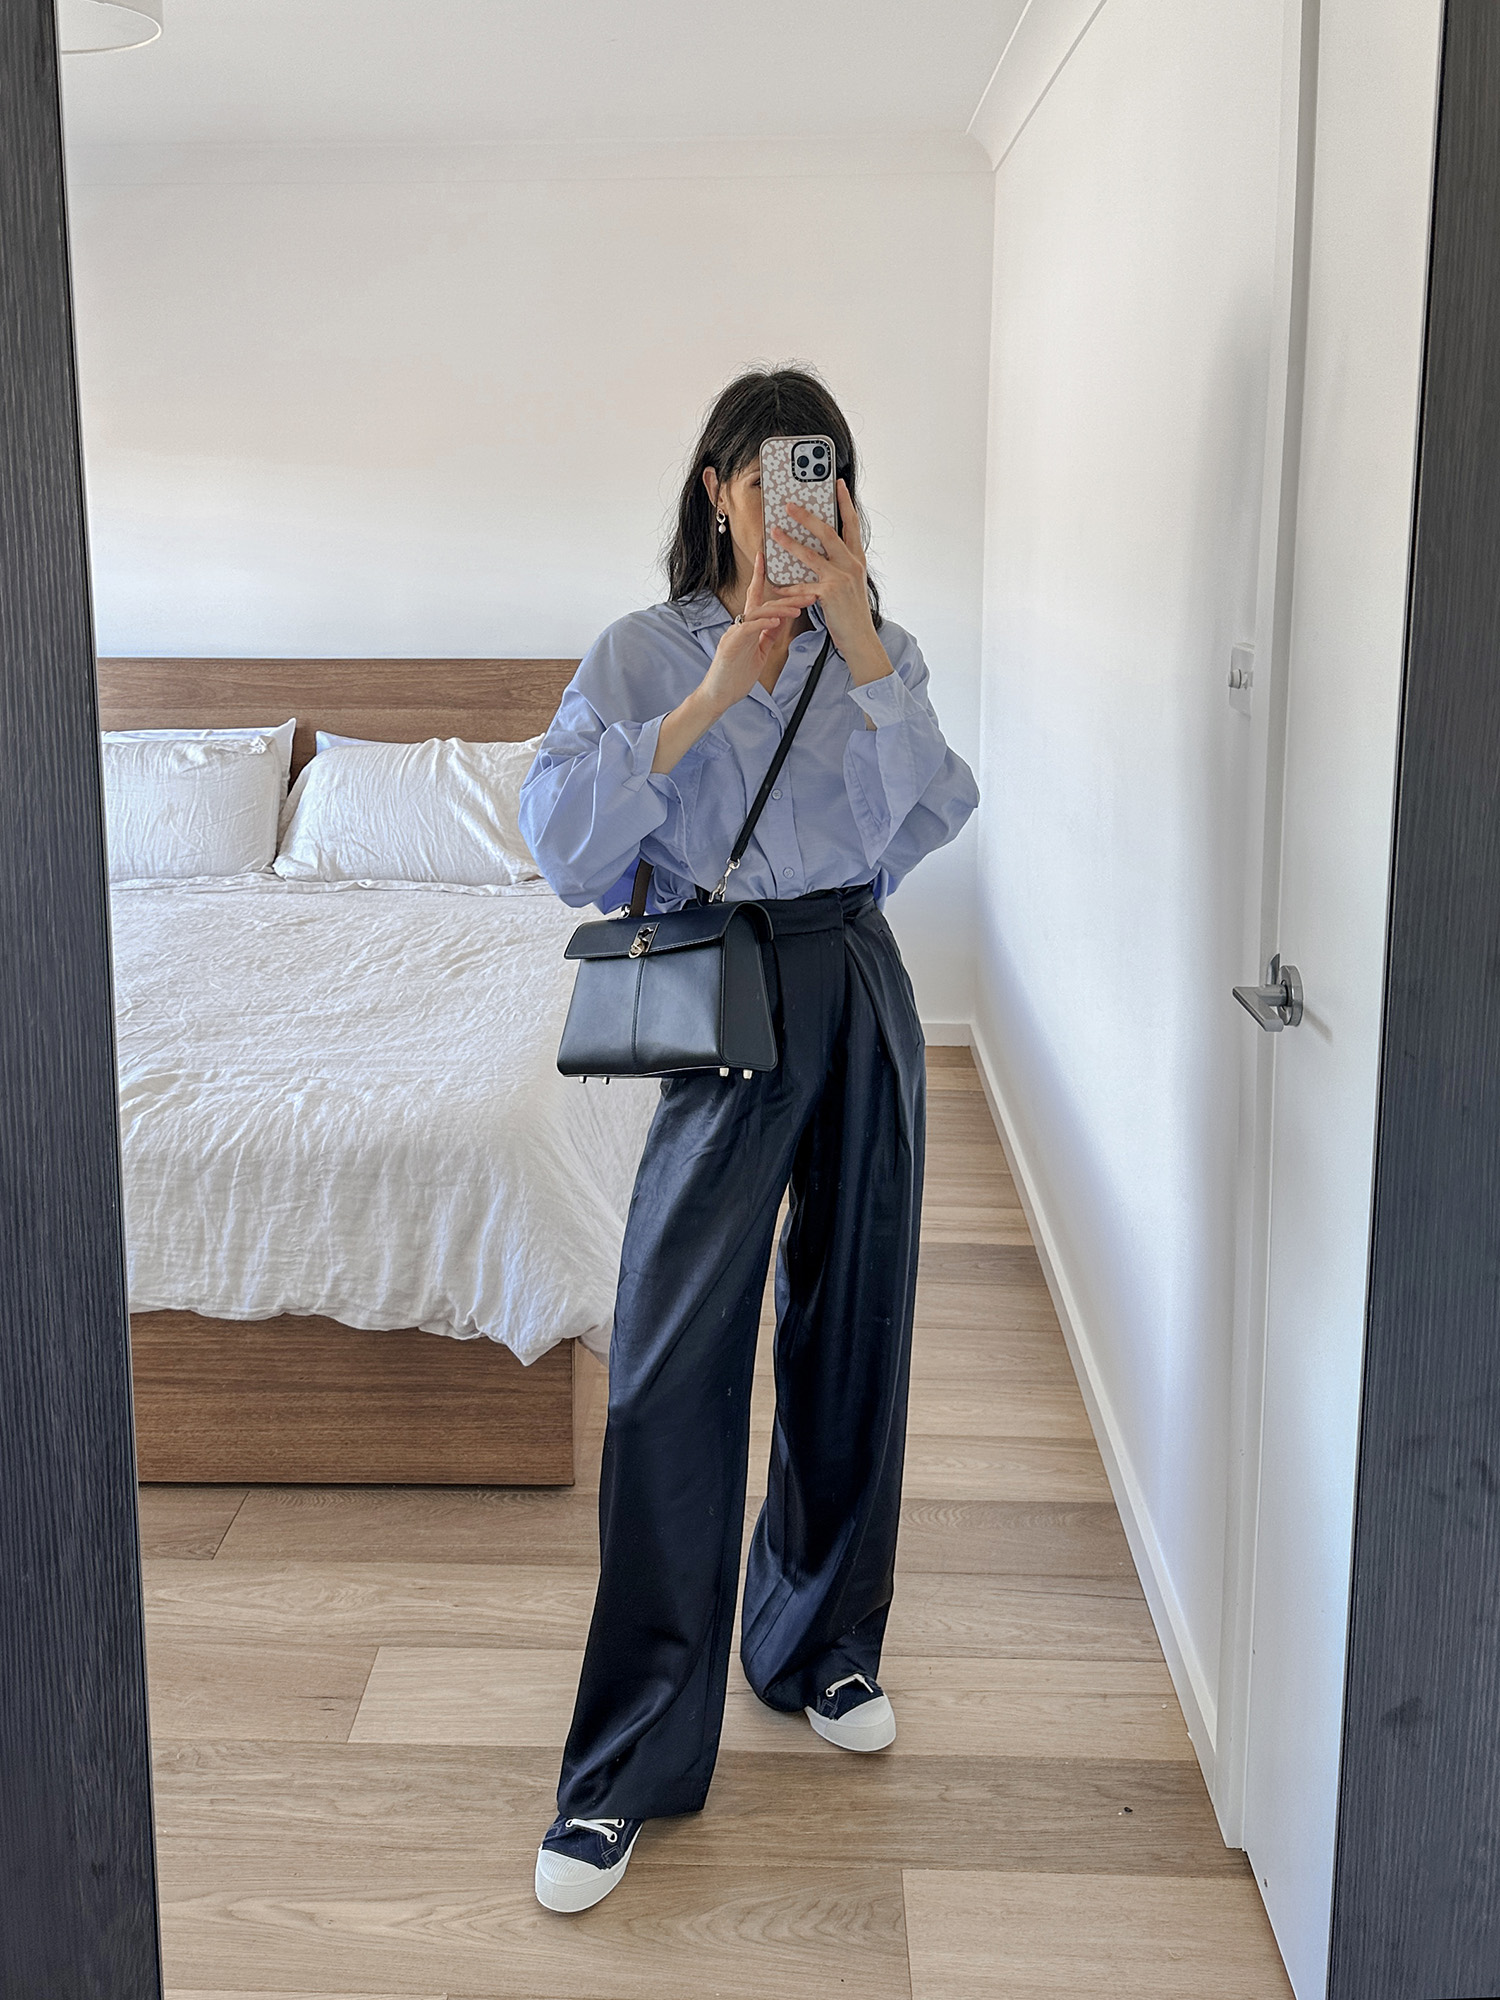 A week of outfit ideas for May - Mademoiselle | Minimal Style Blog